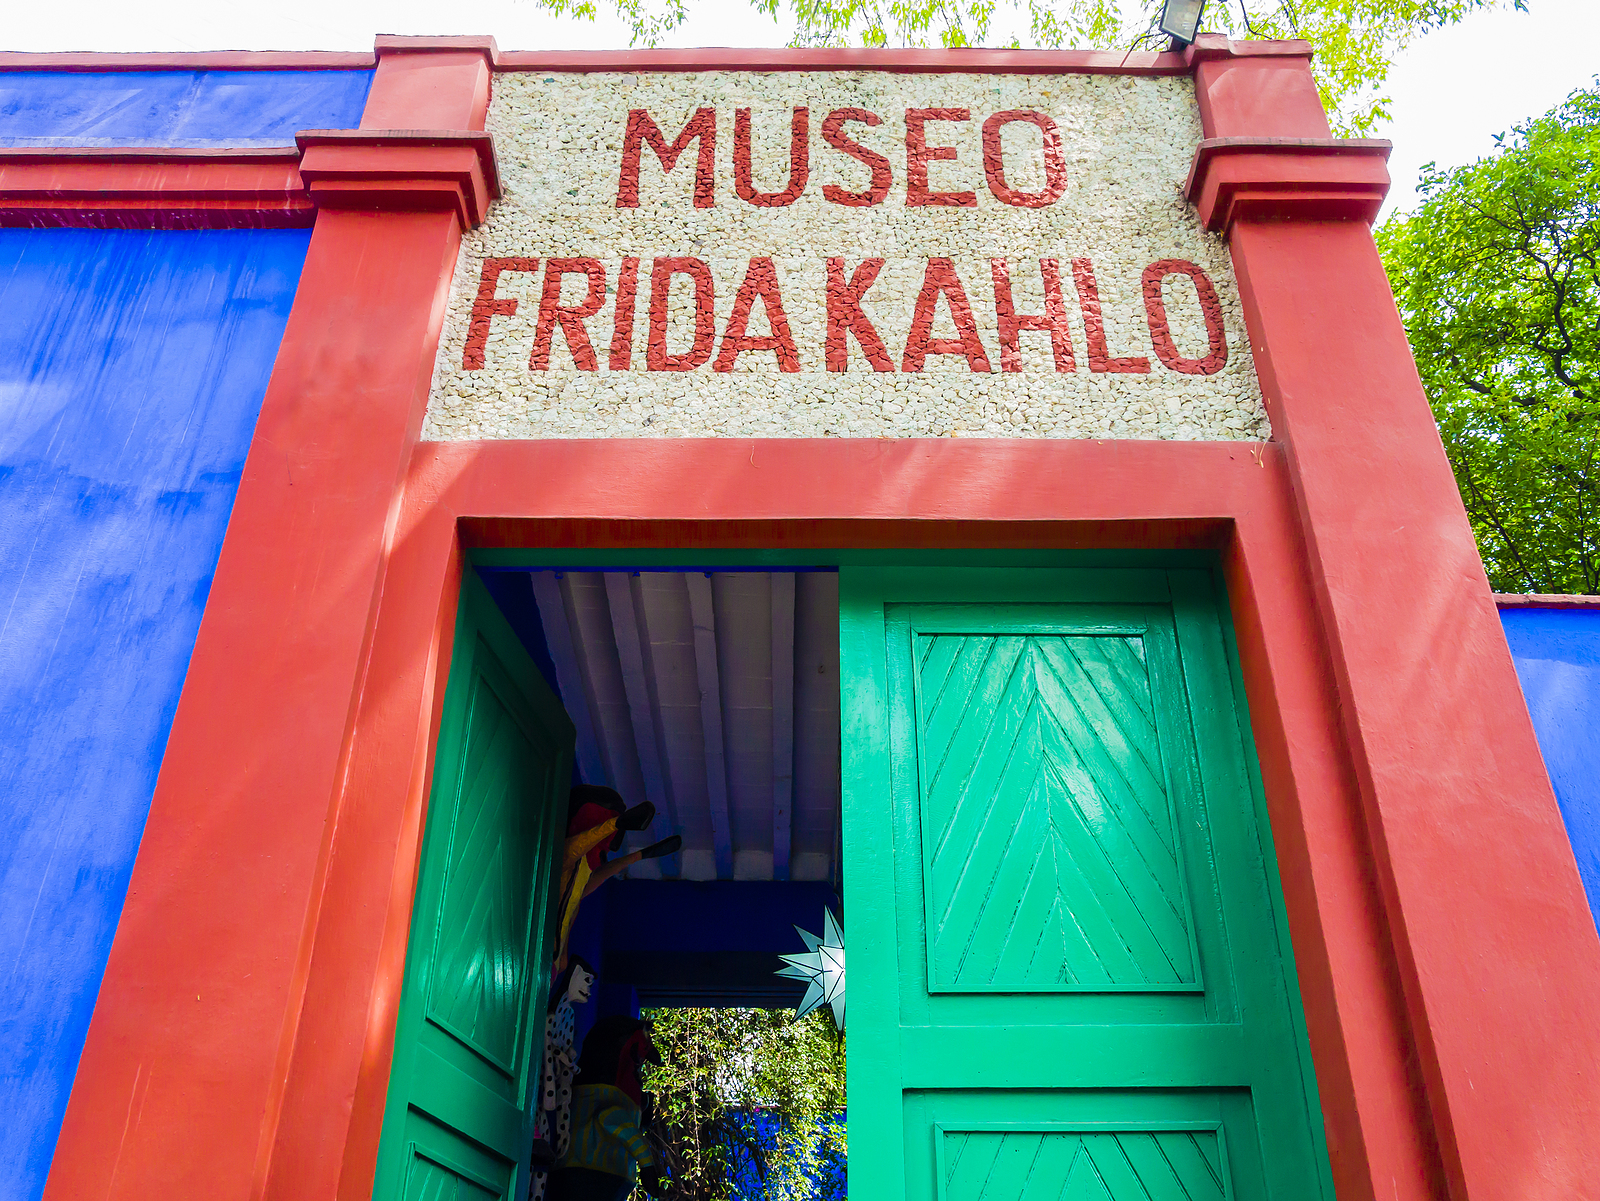 Frida's house, with large colorful doors and bright turquoise blue in color.